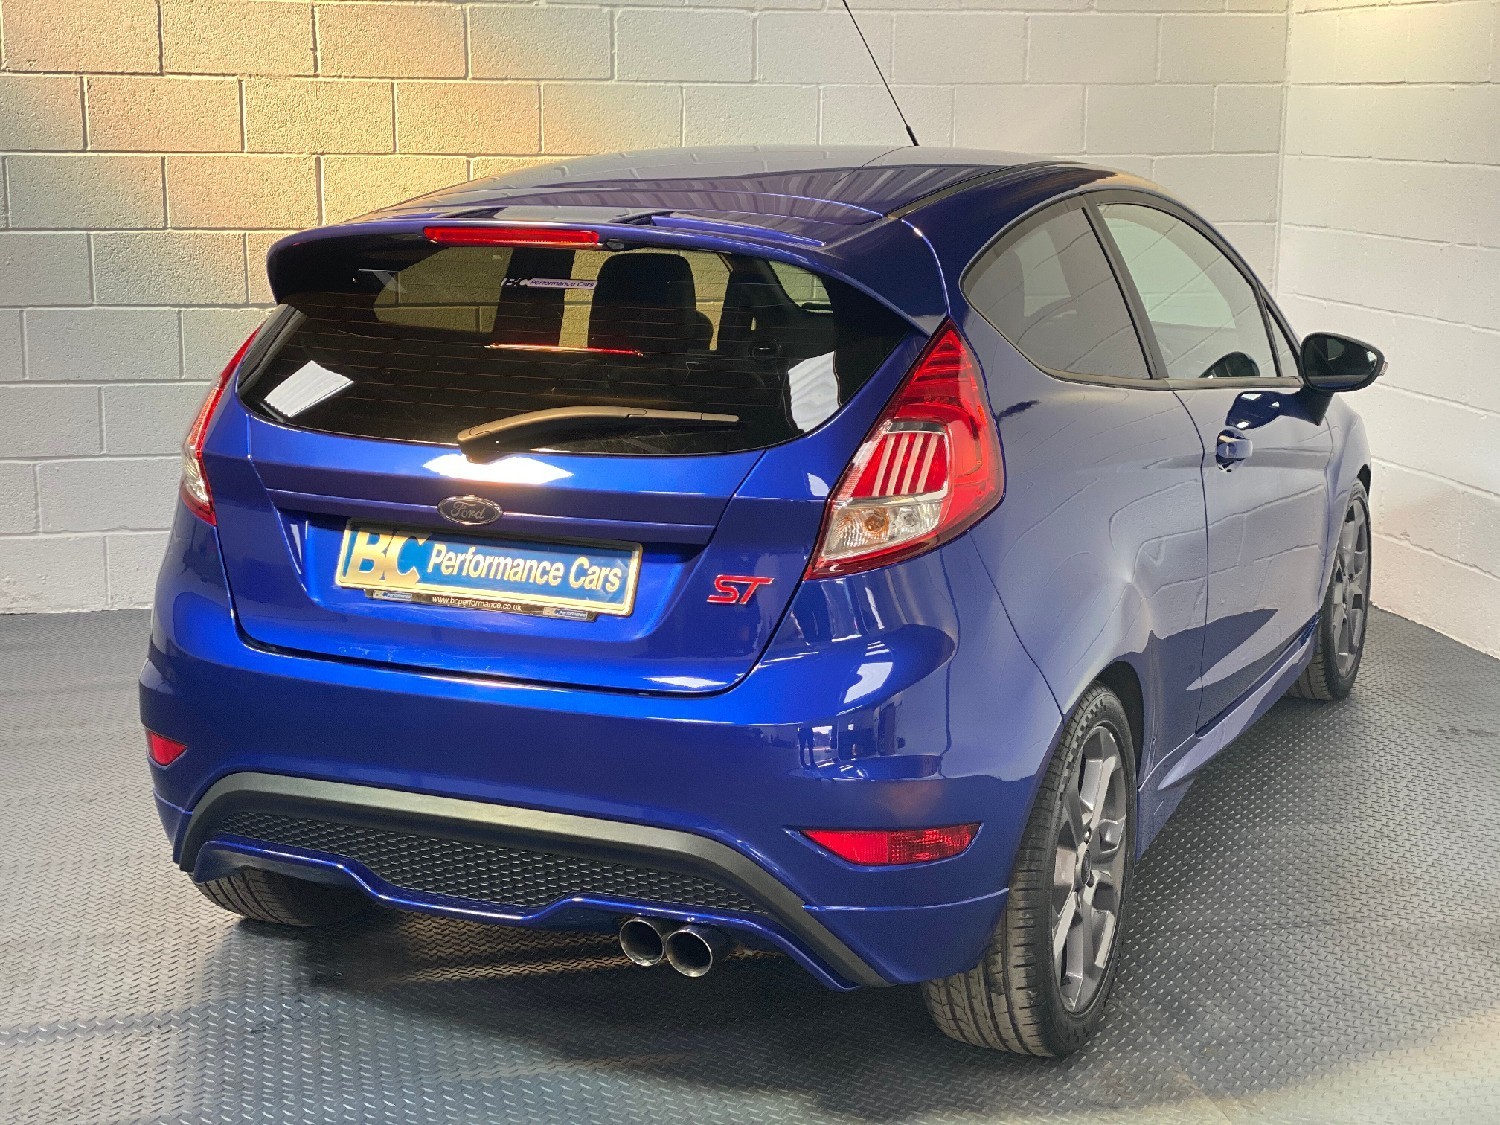 Used FORD FIESTA in Stroud, Gloucestershire BC Performance Cars